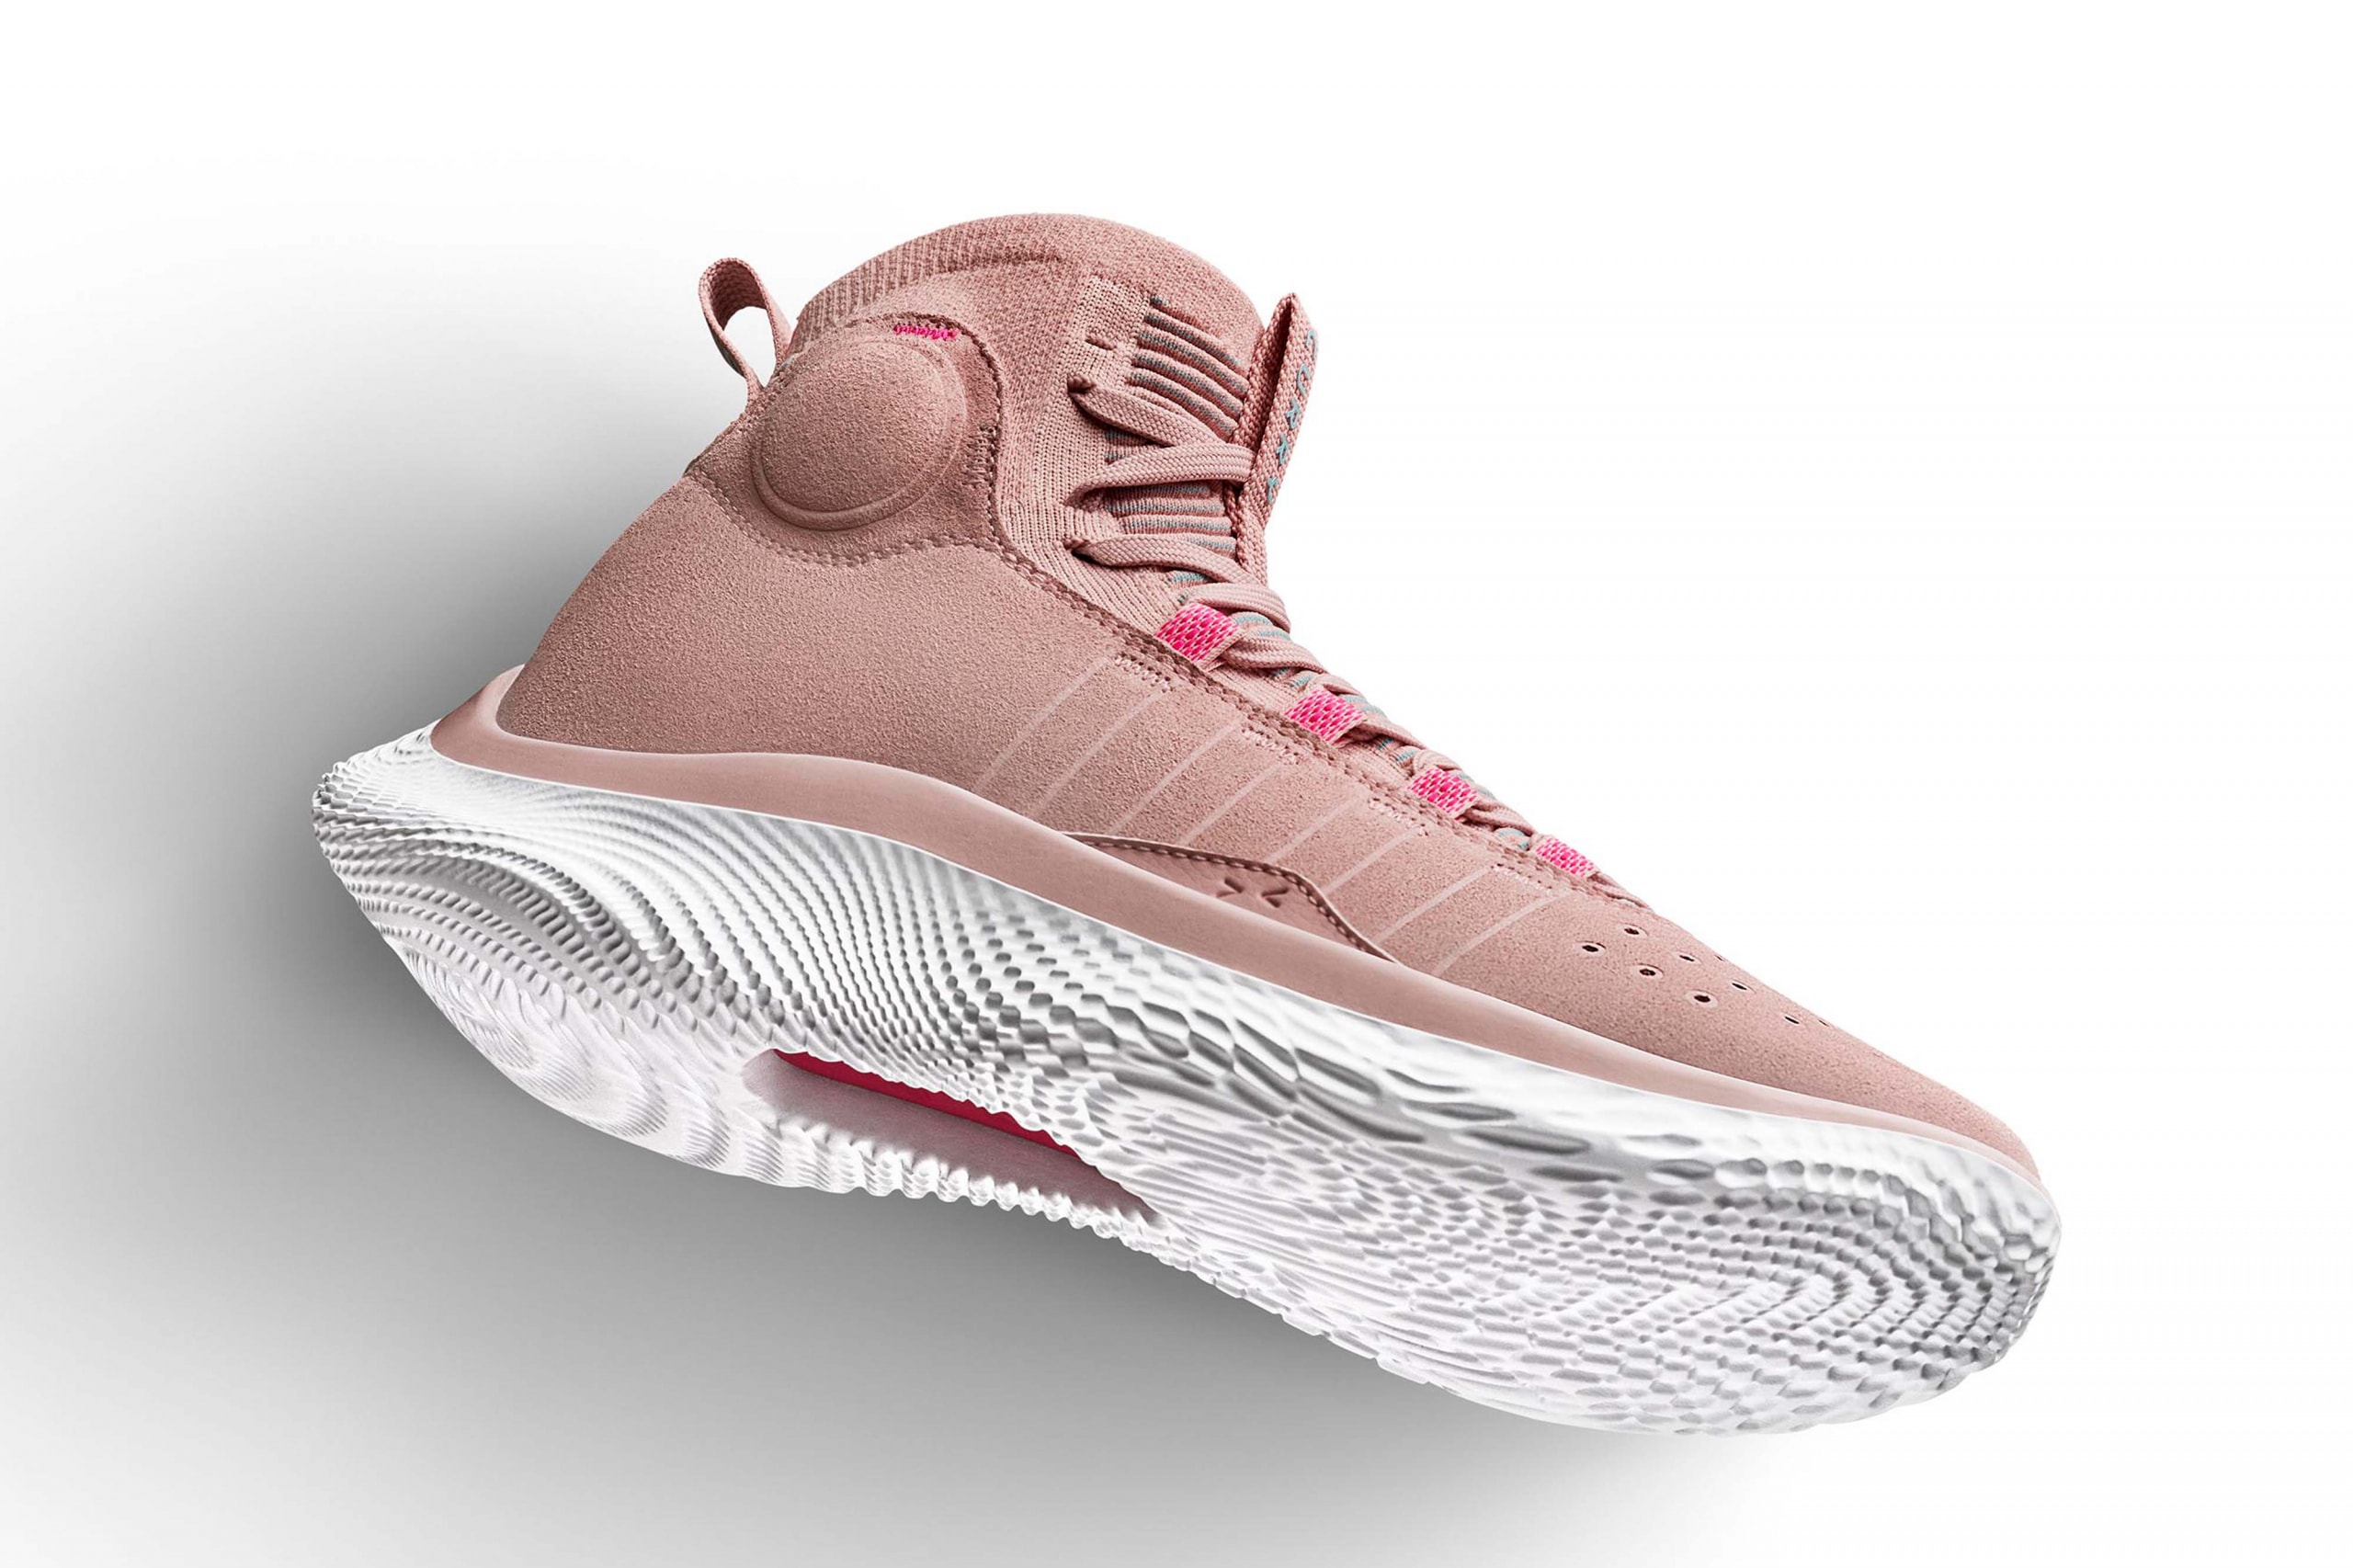 Curry Brand Announces the Curry 4 FloTro sneakers black pink grey lilac